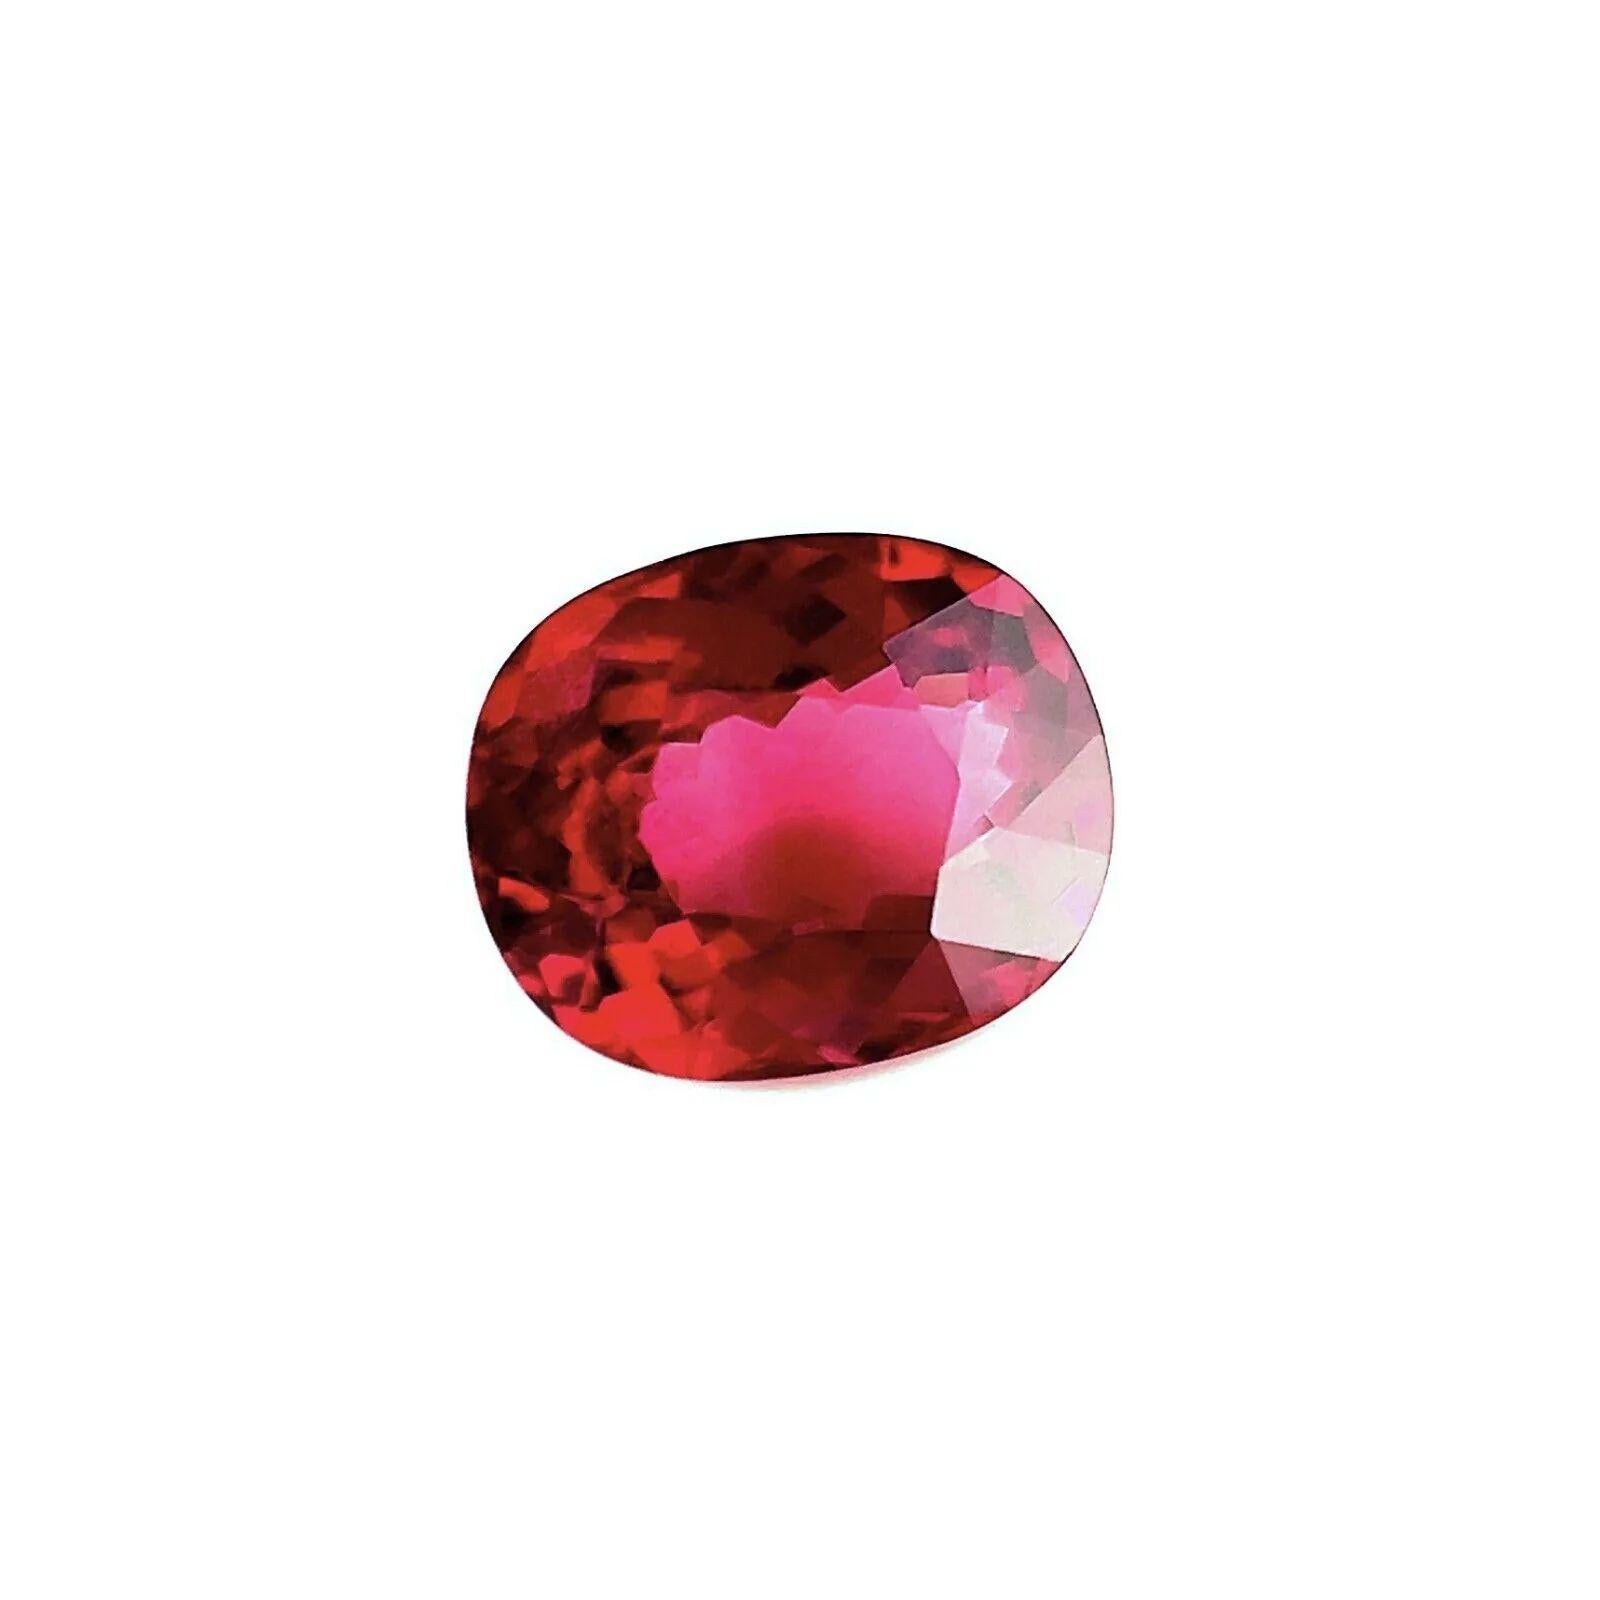 Natural 2.28ct Vivid Pink Red Rhodolite Garnet Cushion 8.7x7mm Loose Gemstone

Natural Loose Rhodolite Garnet Gem.
2.28 Carat with a beautiful vivid purple red colour and good clarity, a clean stone with only some small natural inclusions visible